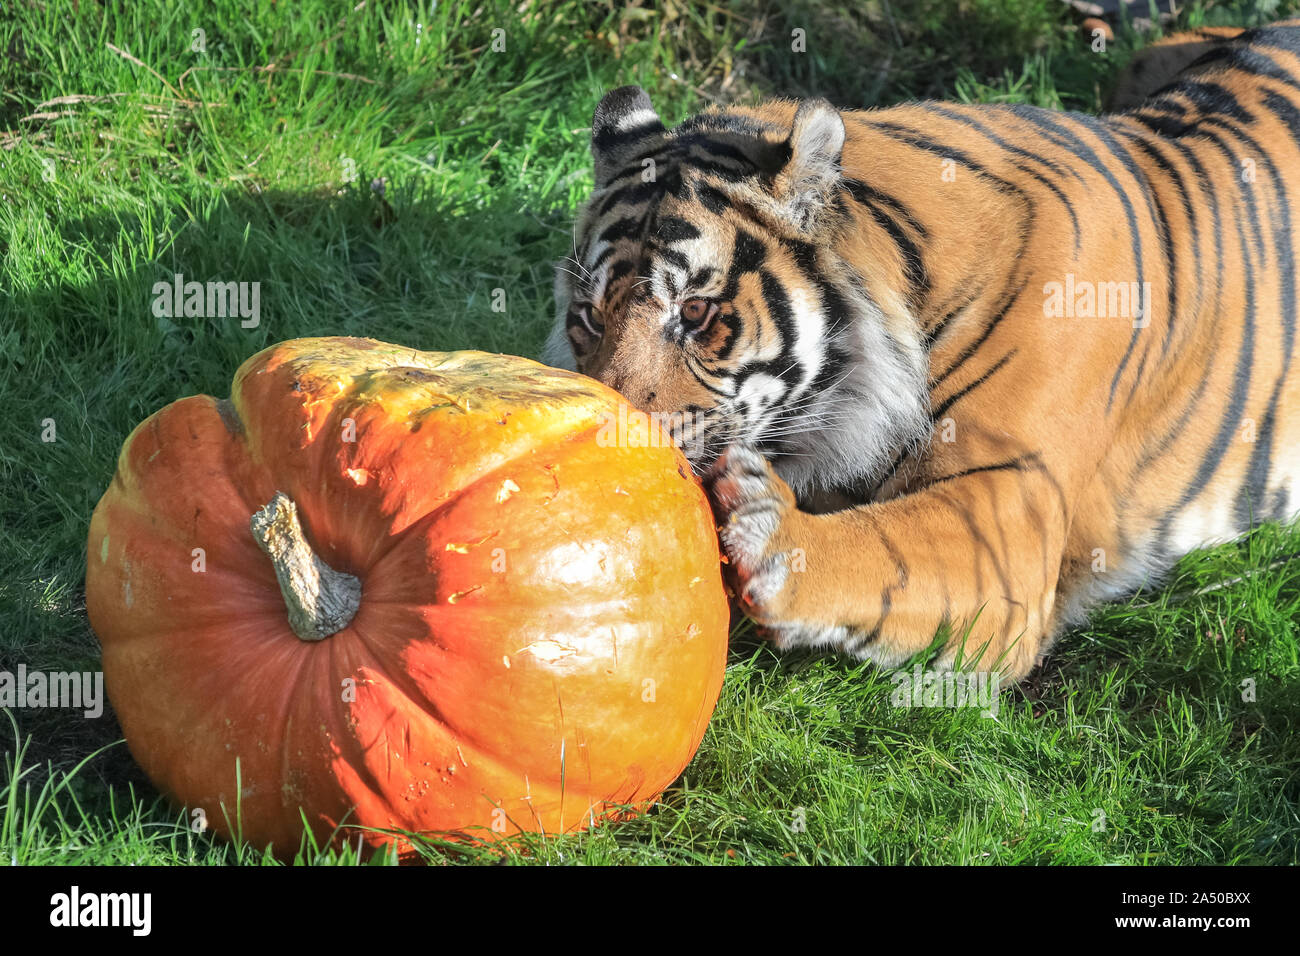 London, UK. 17th Oct, 2019. Sumatran tiger Asim, a critically endangered species, (Panthera tigris sondaica) gets his paws on a giant ghoulish pumpkin and smaller pumpkins with meaty treats inside. Lemurs, pygmy hippos and tigers are all getting into the Halloween spirit, as ZSL London Zoo counts down to a week of fiendish family fun for half-term. Credit: Imageplotter/Alamy Live News Stock Photo